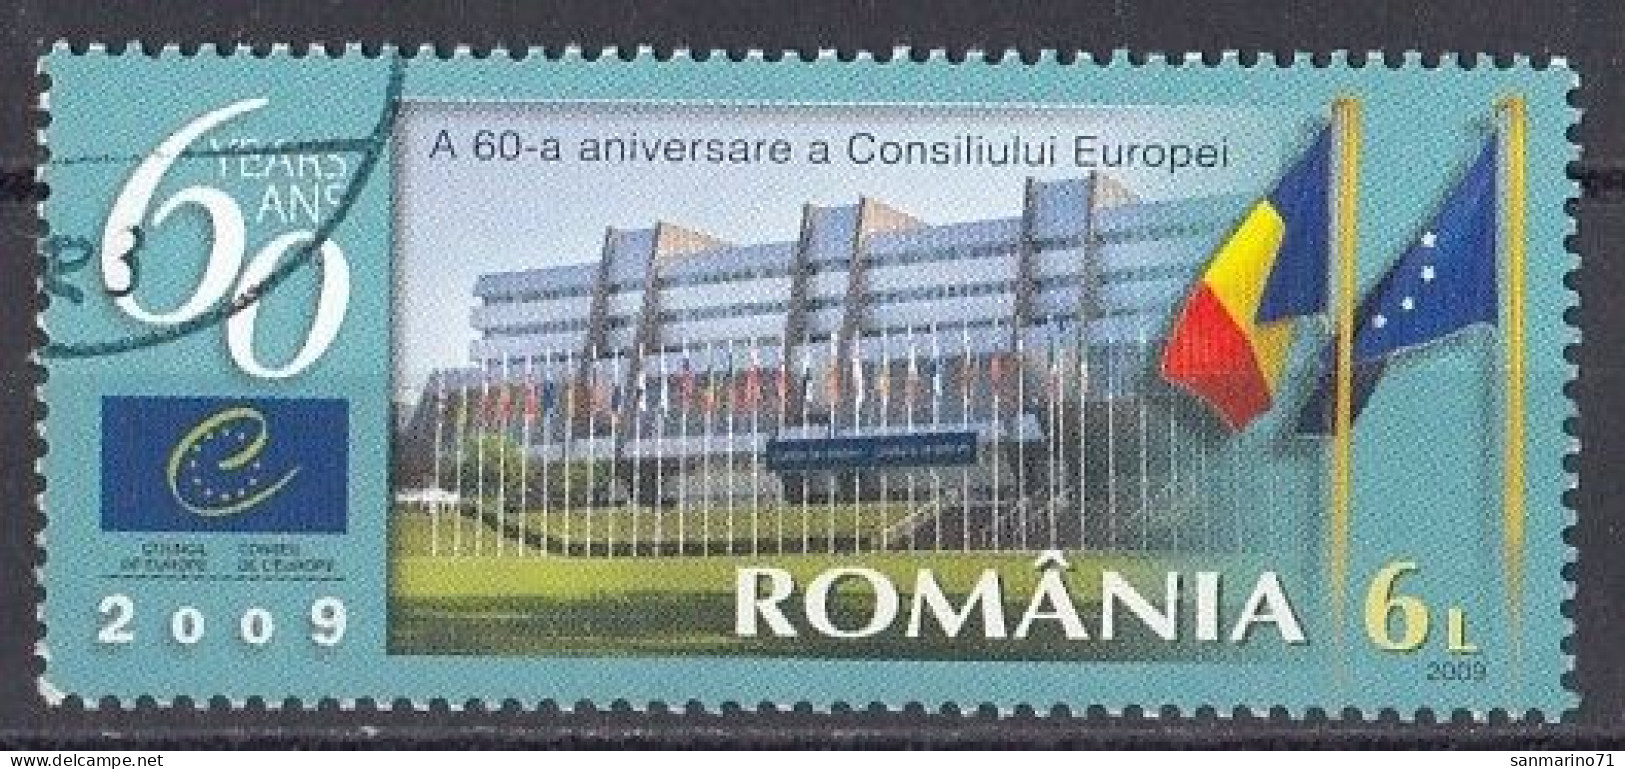 ROMANIA 6359,used,falc Hinged - Used Stamps